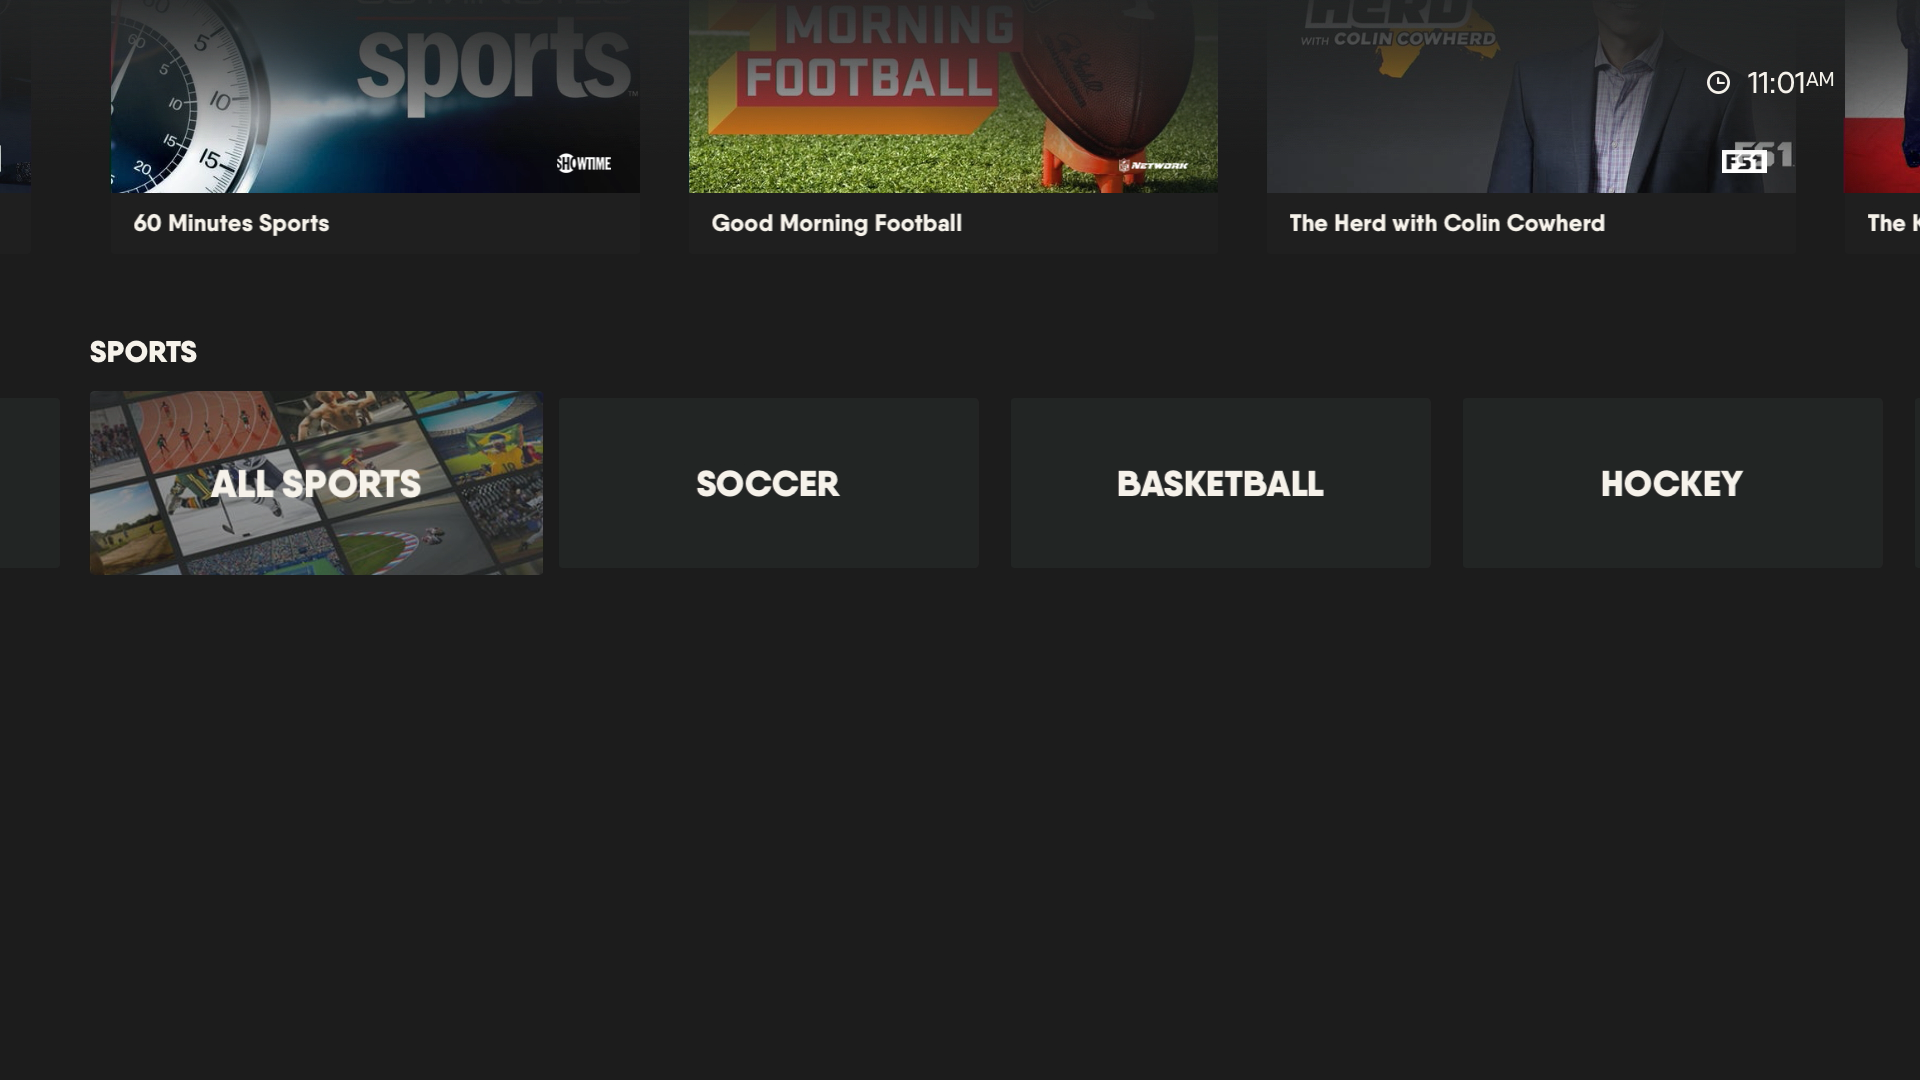 The Sports screen of the FuboTV app on Apple TV with ALL SPORTS highlighted